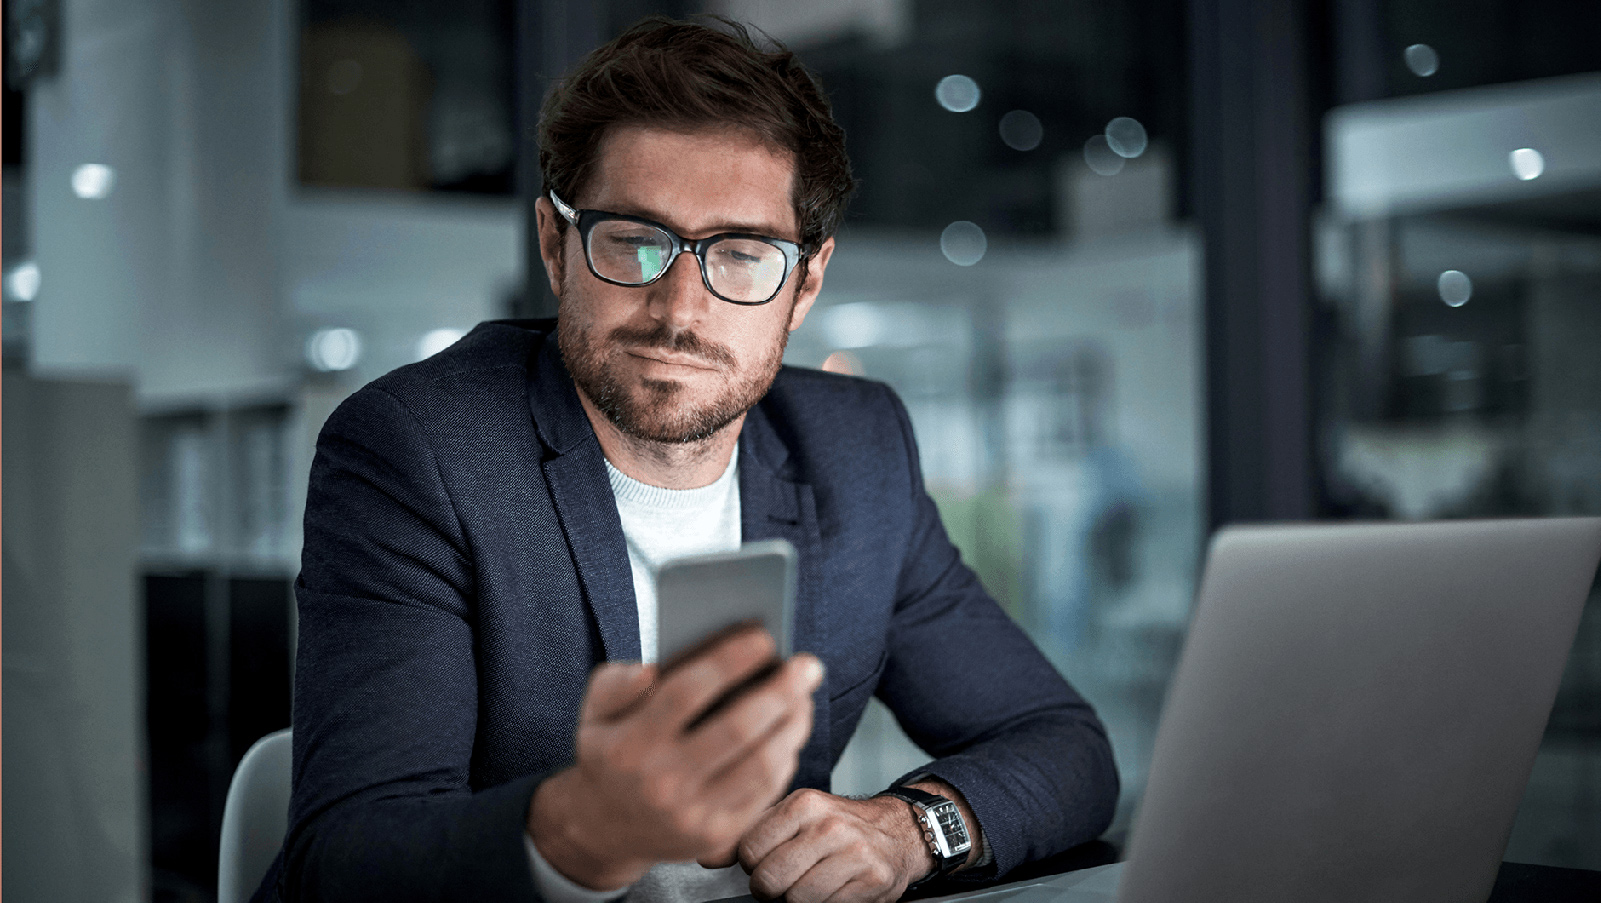 Man in glasses looking at his phone at a desk.